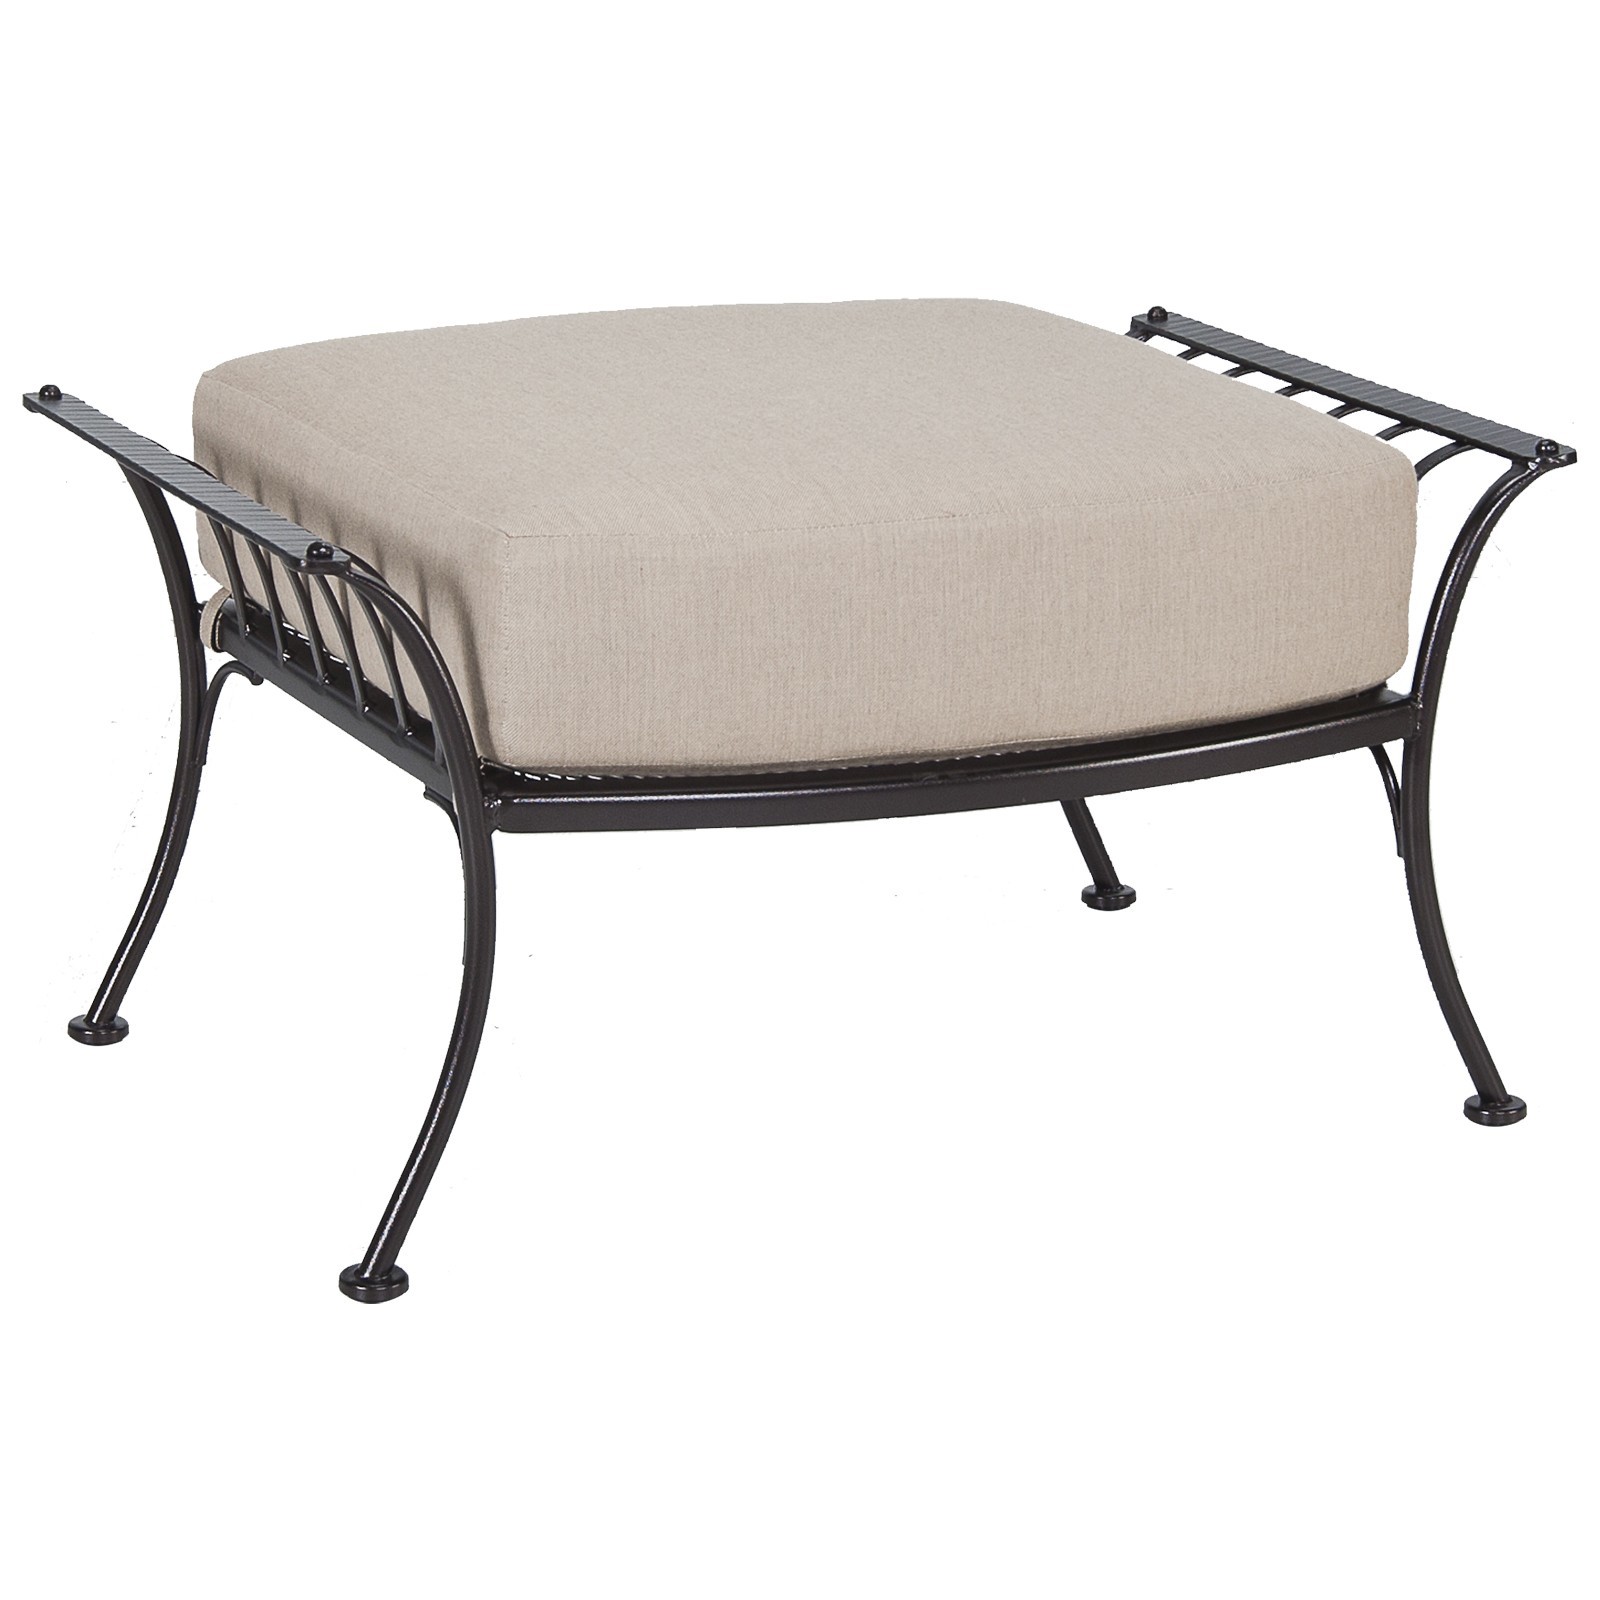 Monterra ottoman luxury outdoor living by hausers patio